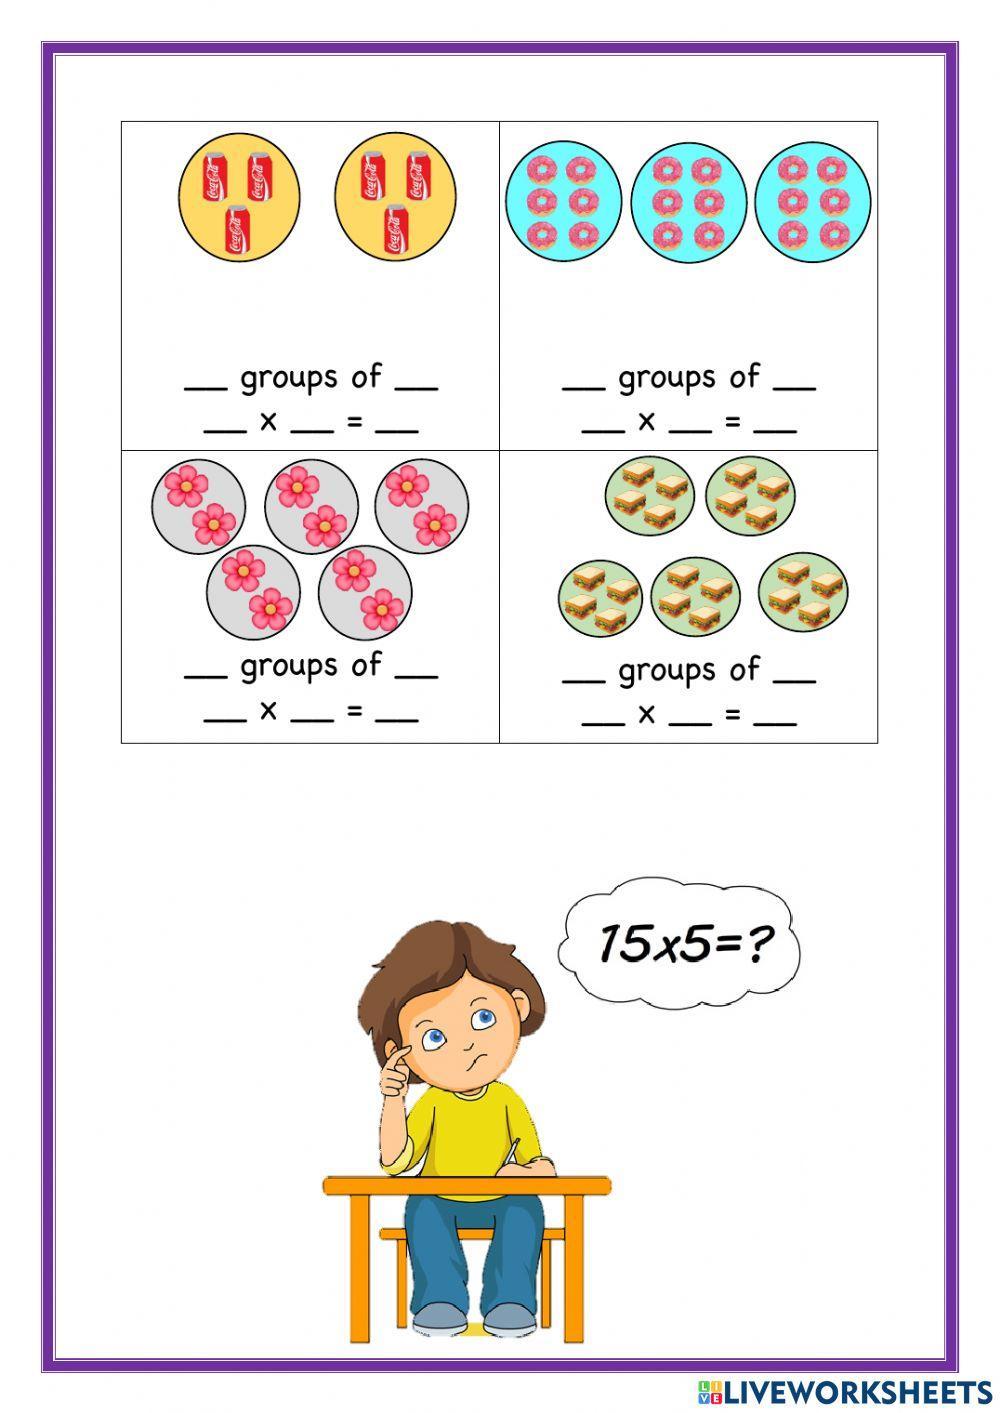 Multiplication (equal groups)